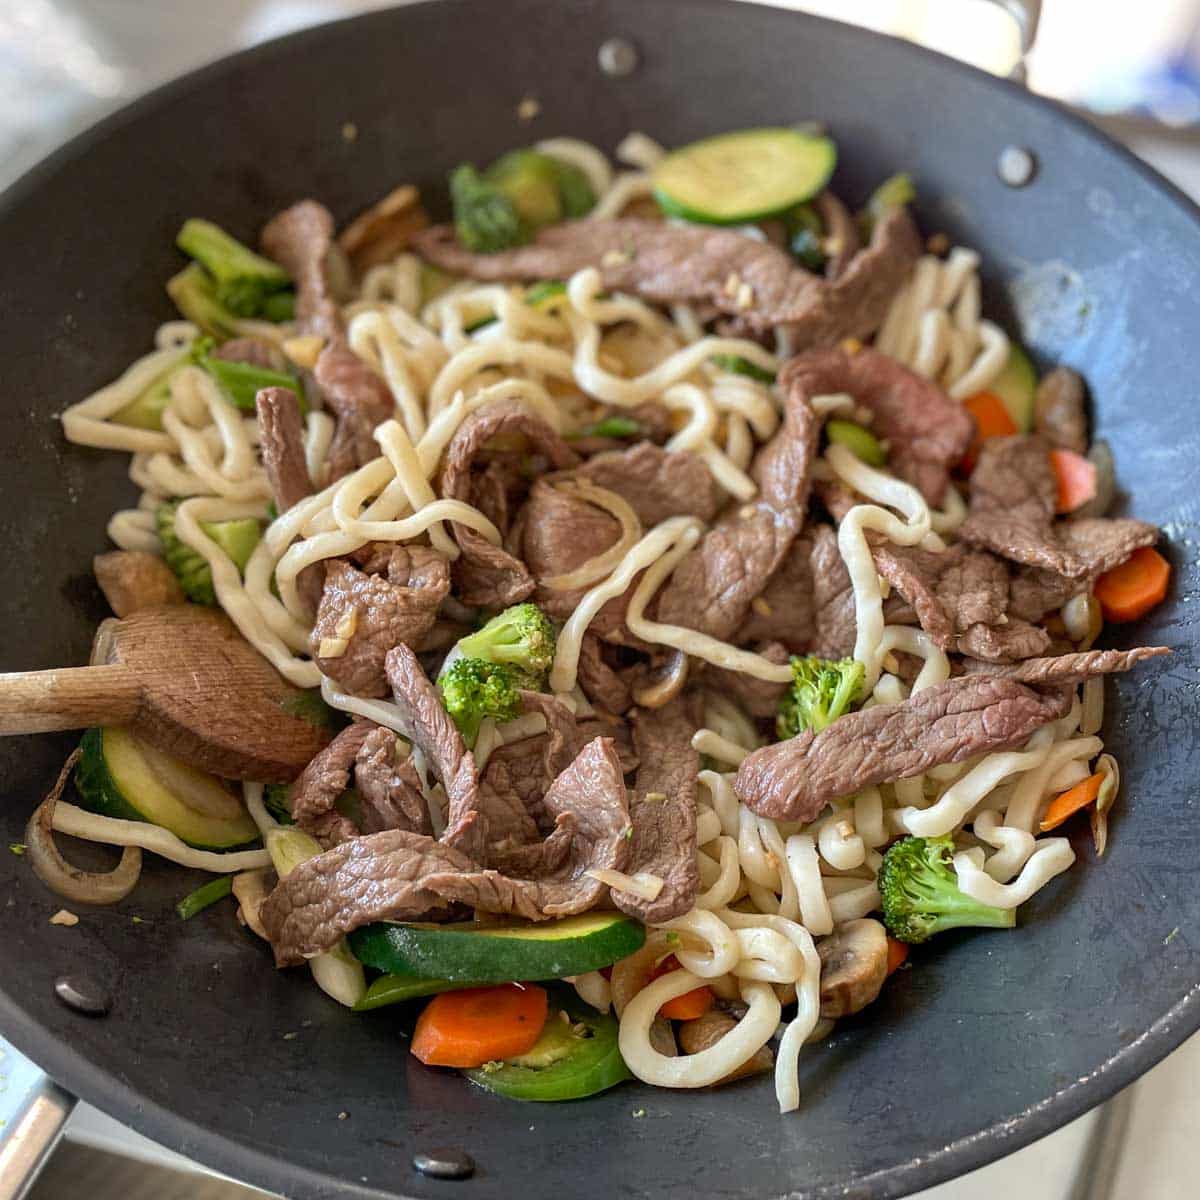 Cooked beef is added into the noodles and vegetables in the wok.